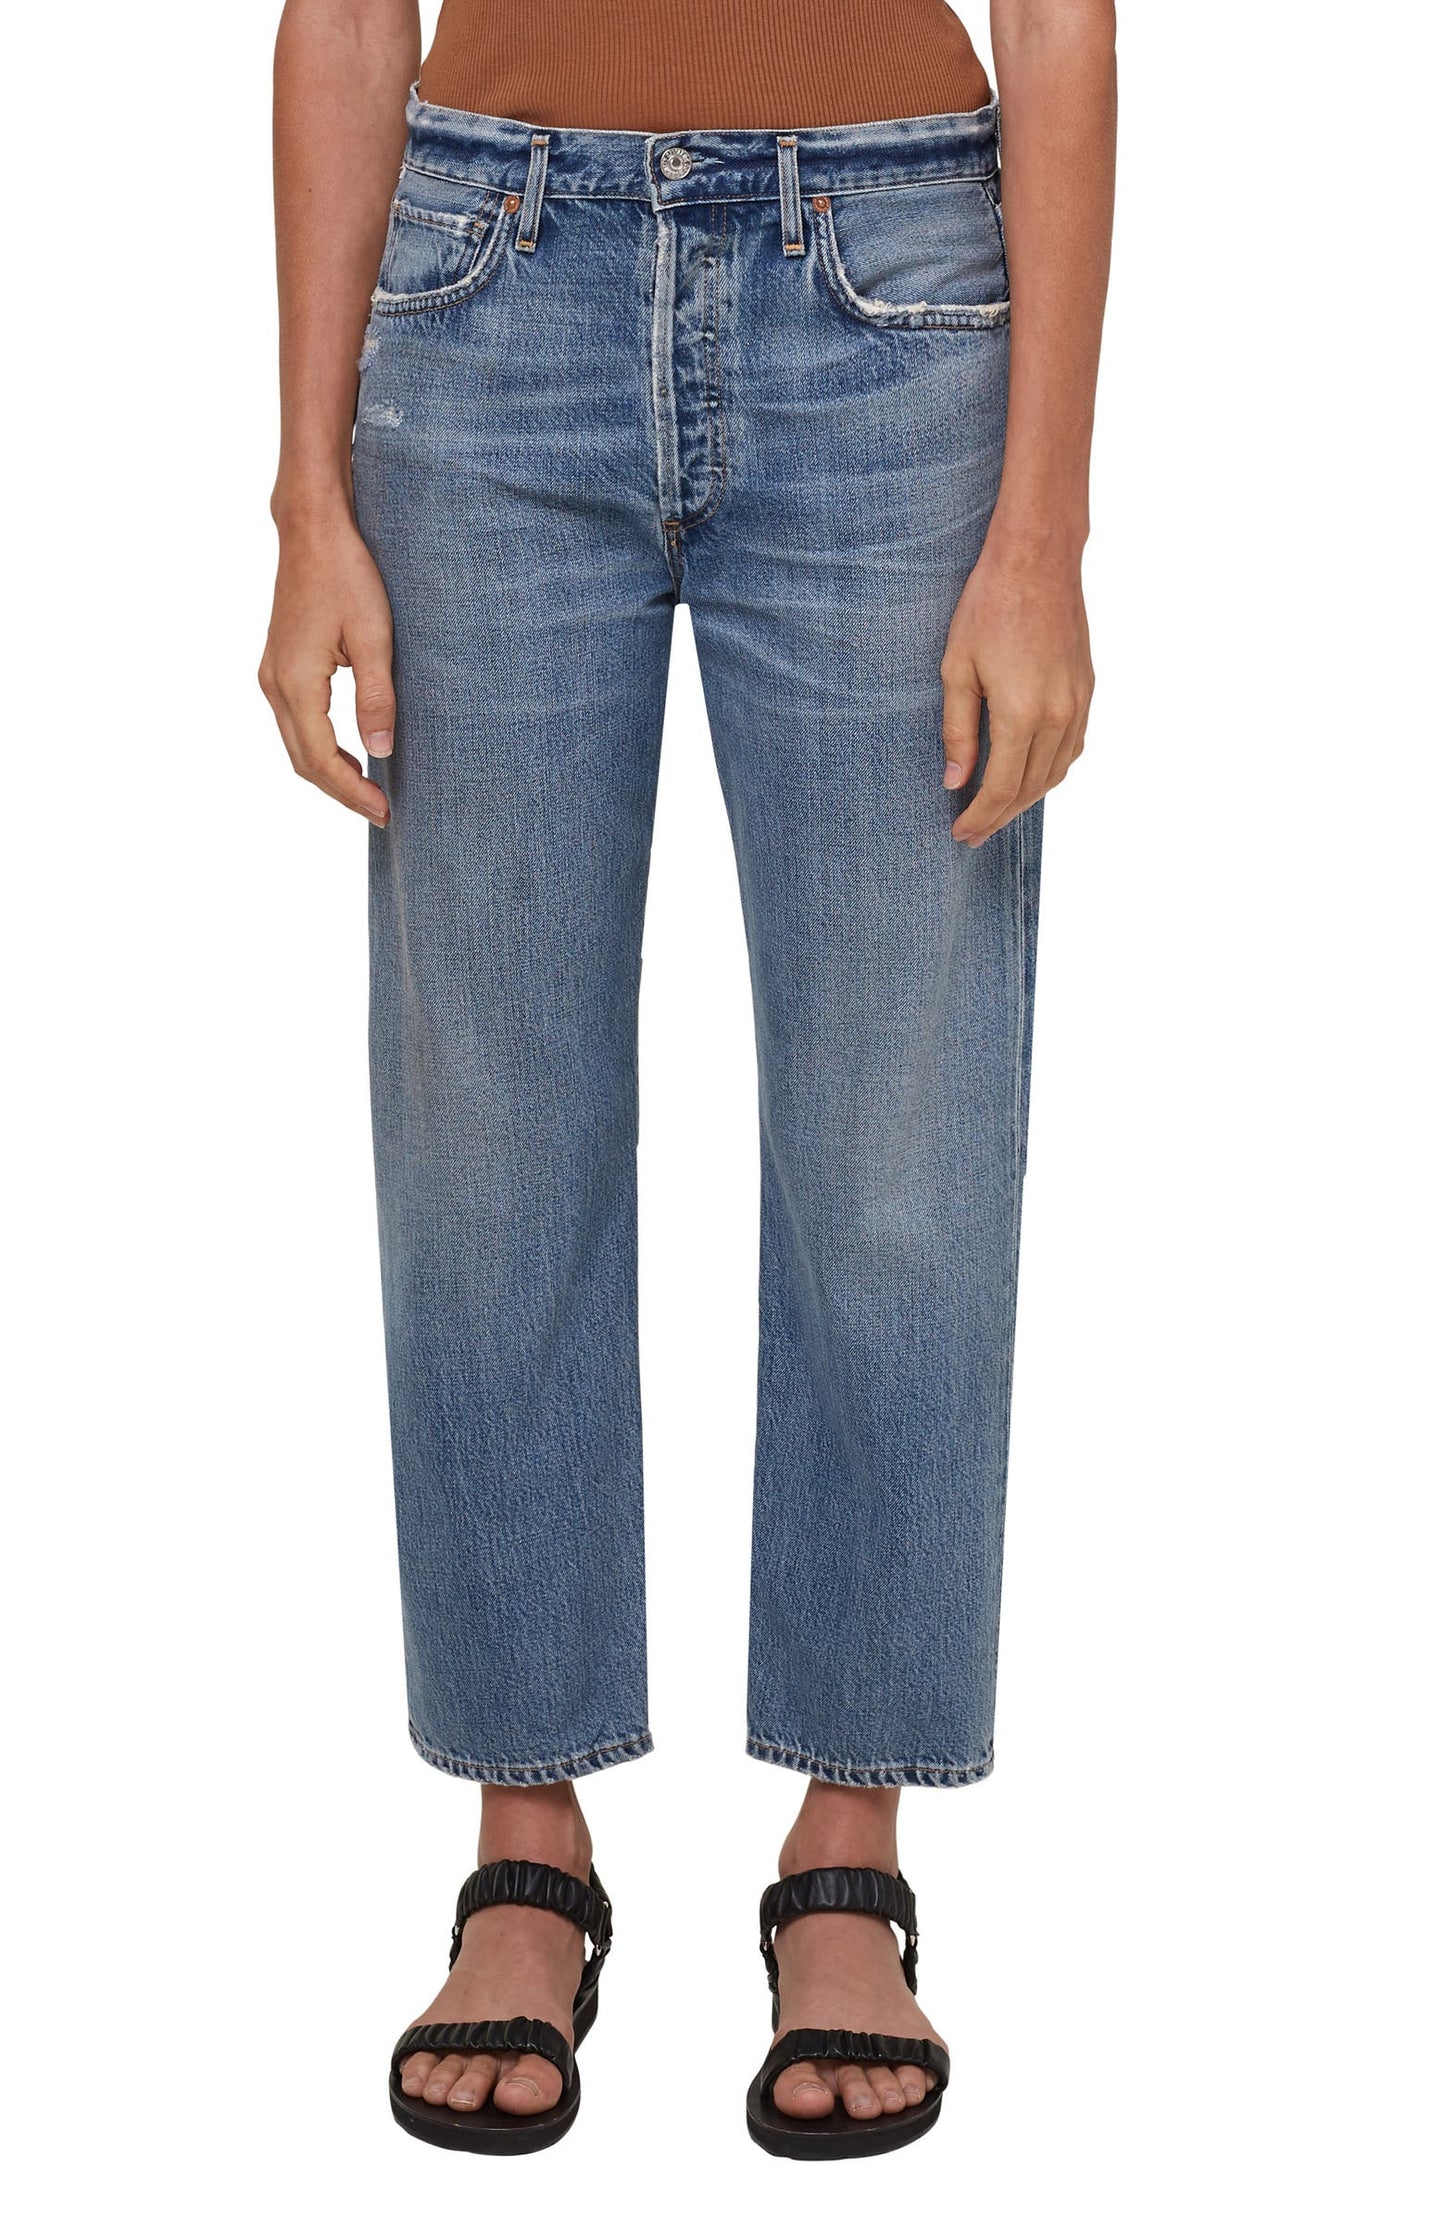 Citizens of Humanity Emery Crop Jean